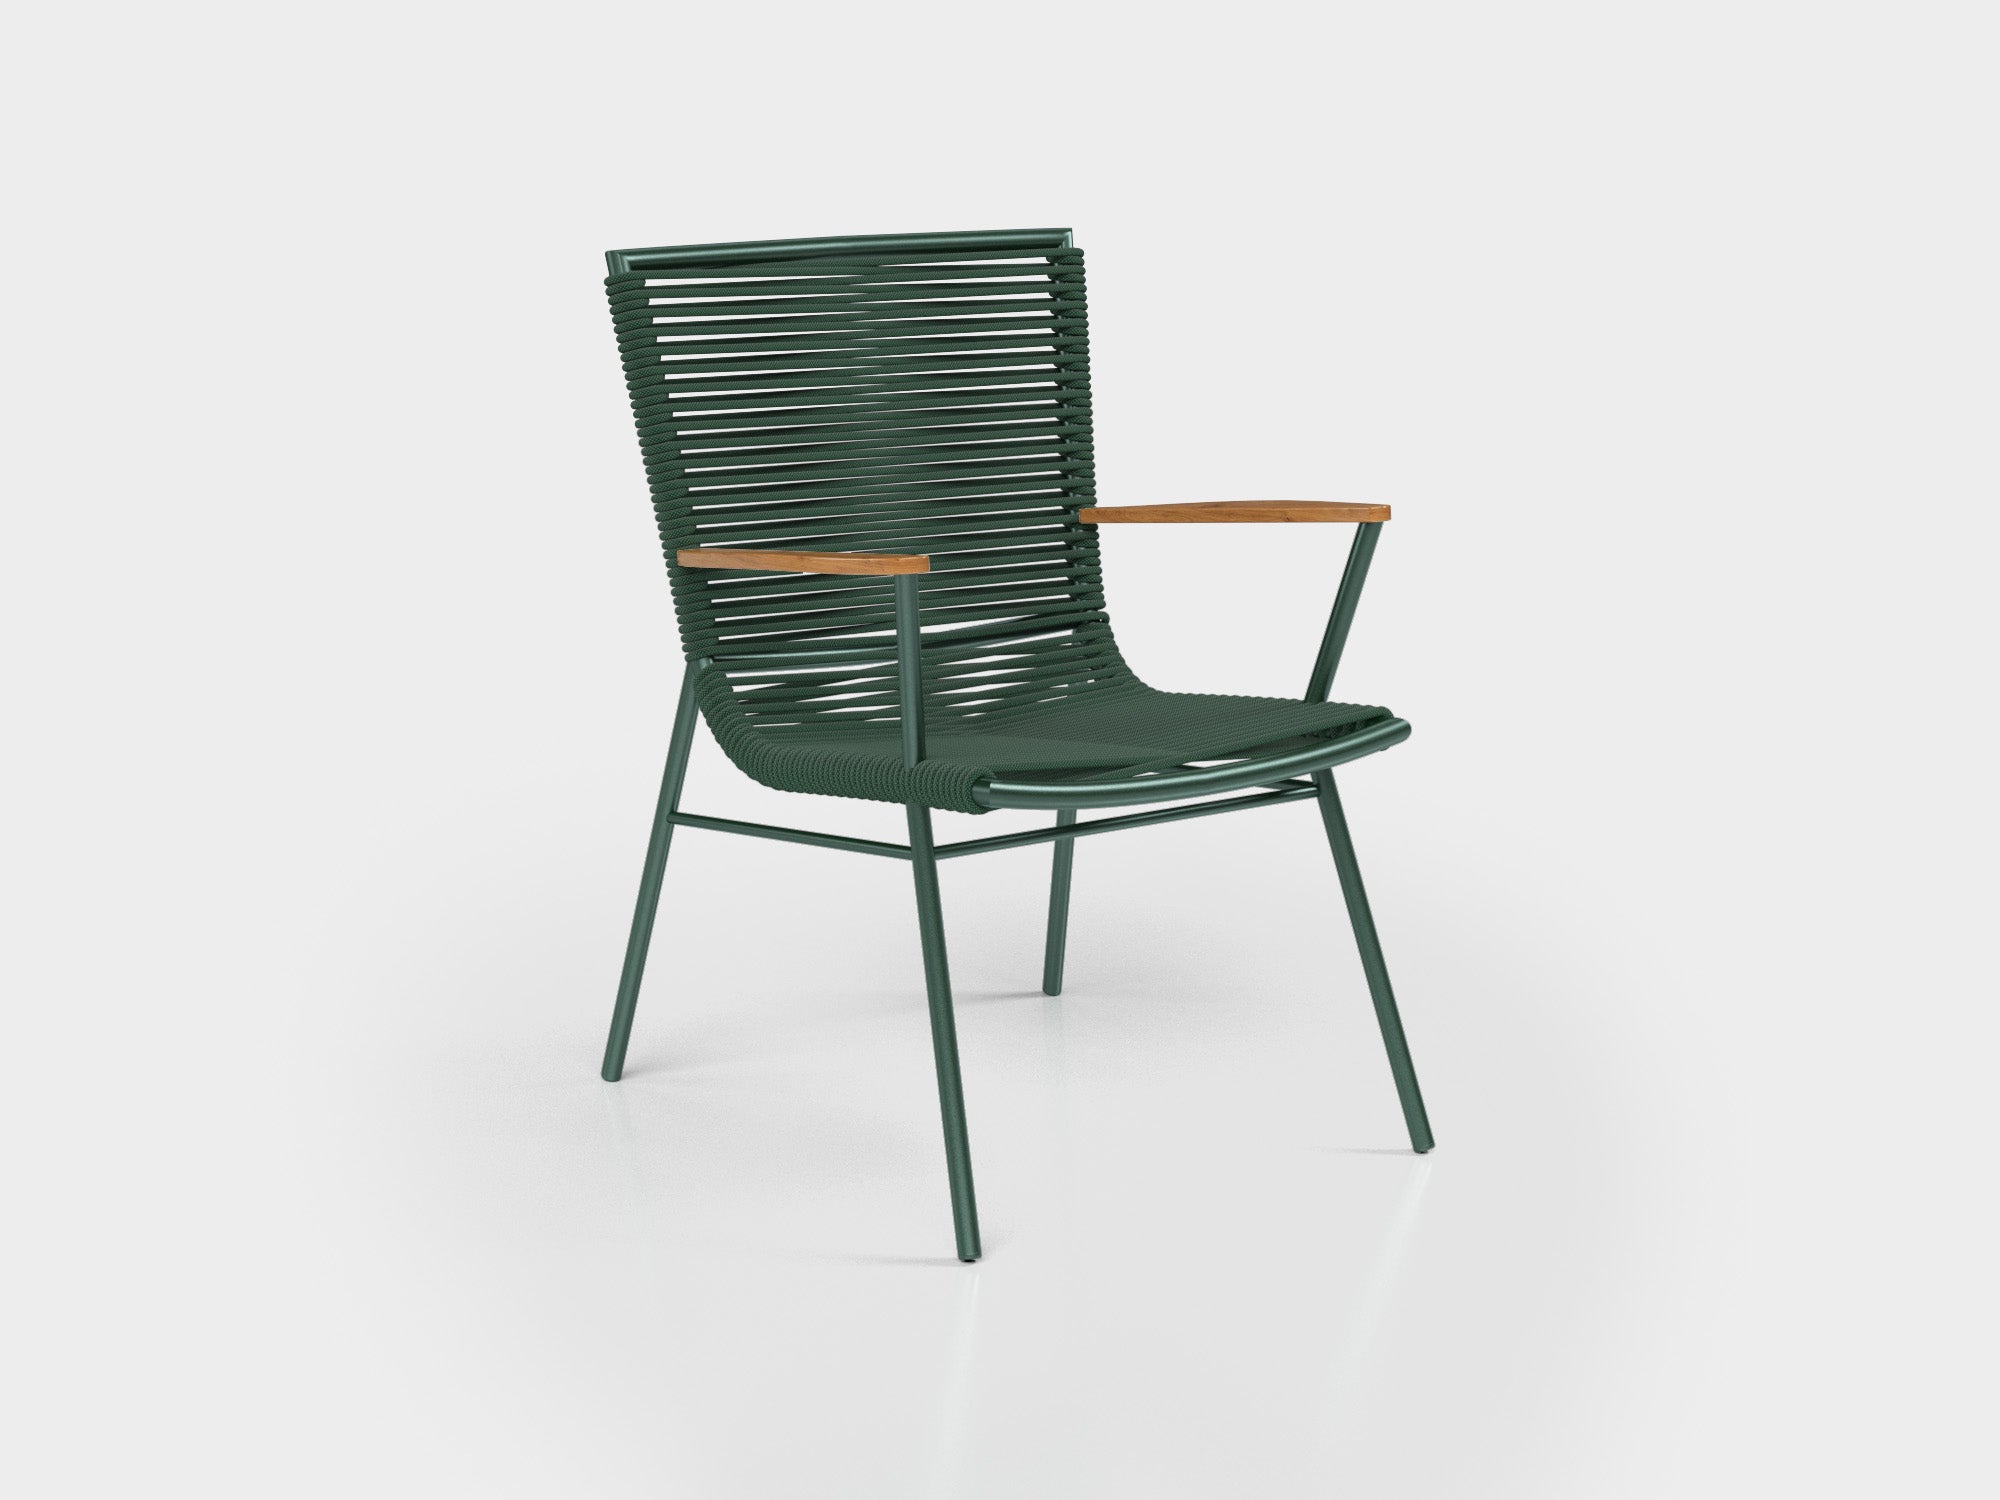 Amado Armchair in green nautical rope, aluminium and wooden arm, designed by Alfio Lisi